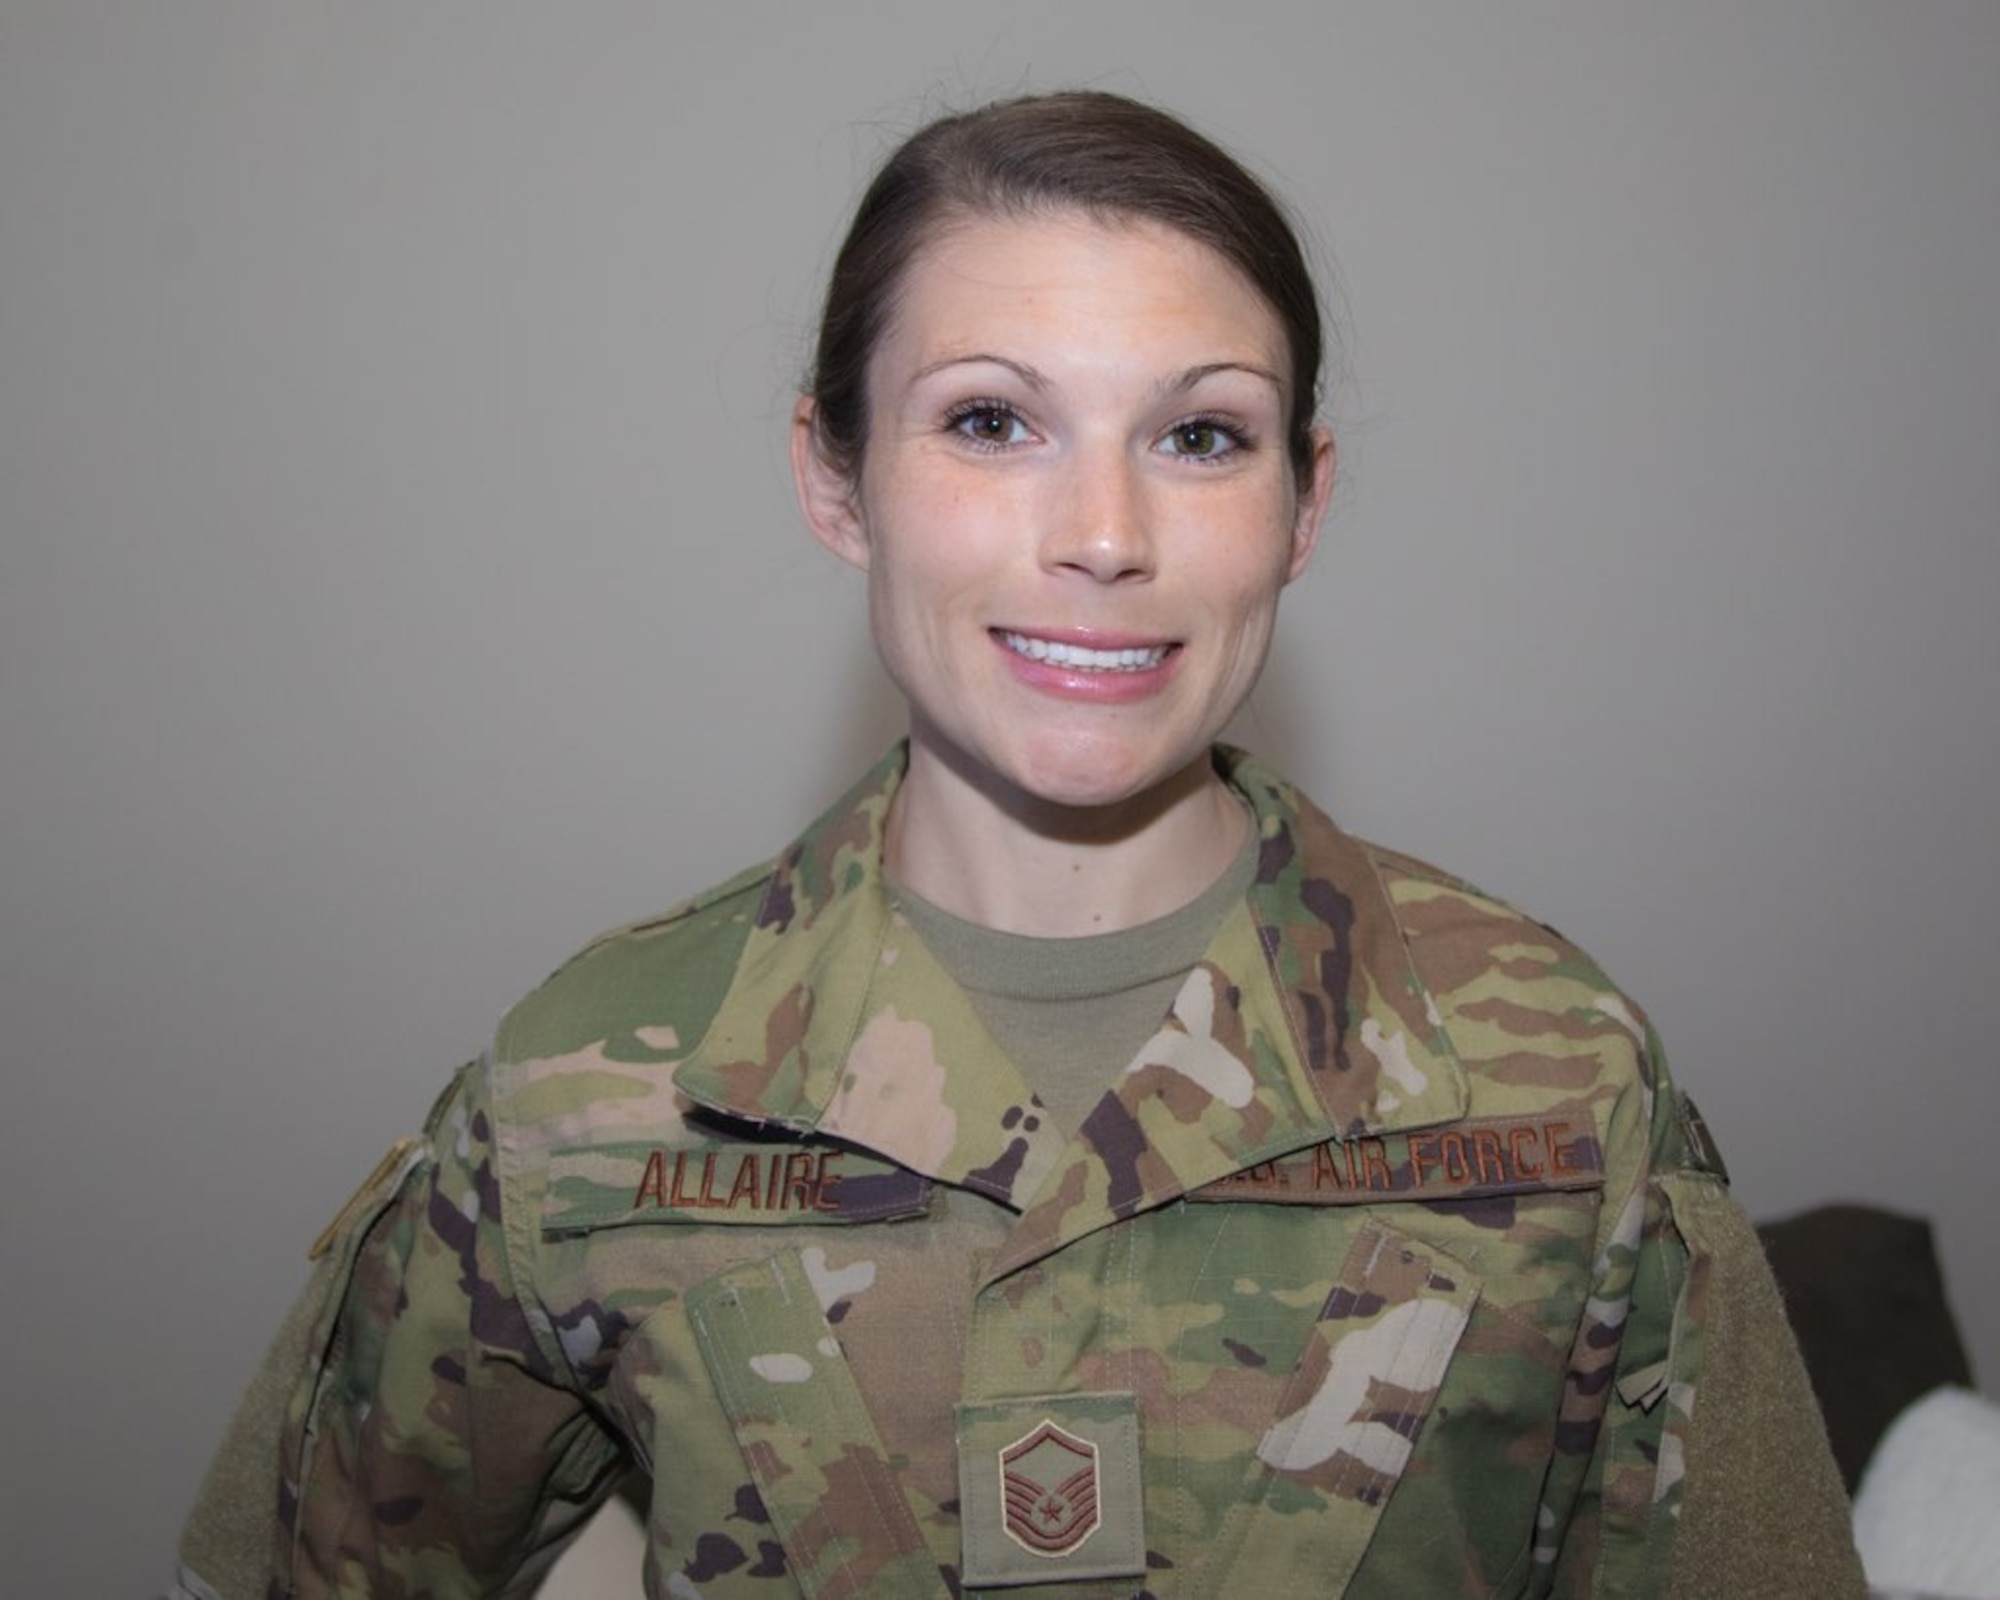 Master Sgt. Danielle Allaire, 41st Aerial Port Squadron air transportation specialist, passenger service noncommissioned officer in charge, poses for a photo. Allaire is a travel nurse in her civilian career and is currently working with COVID-19 patients. (courtesy photo)